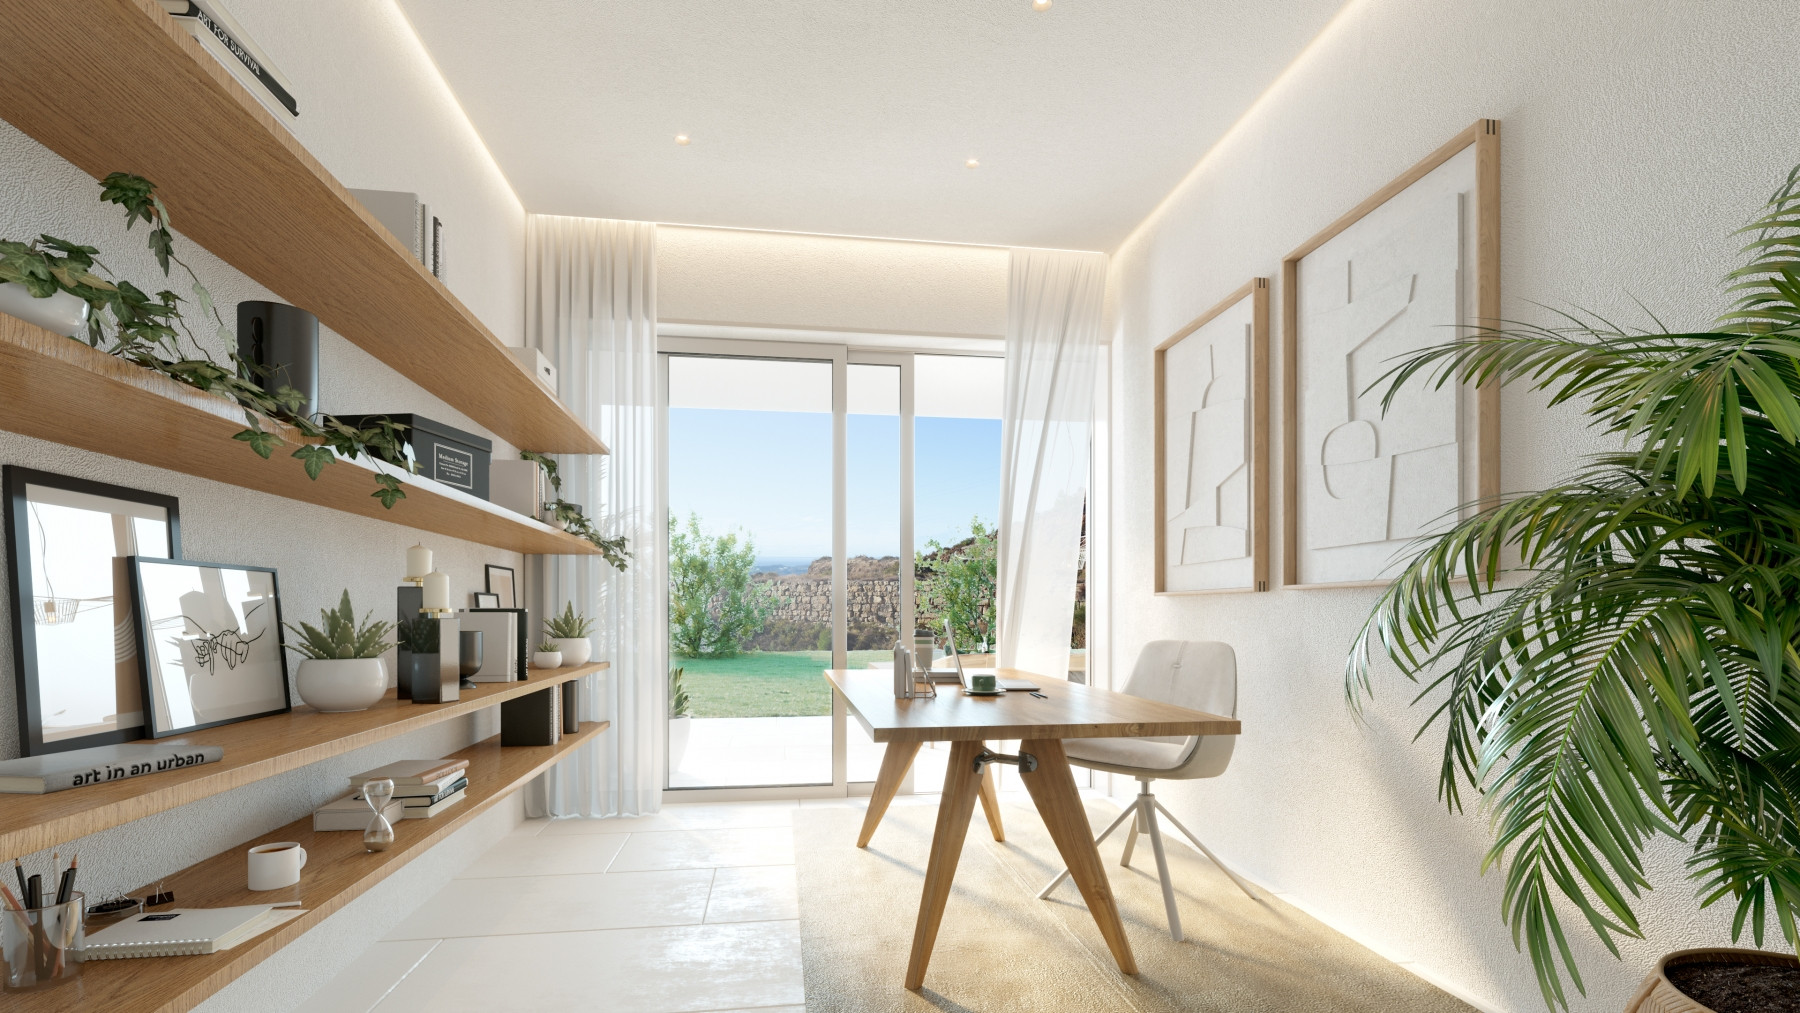 Modern styled off-plan apartments and penthouses for sale in Reserva del Higuerón - Fuengirola